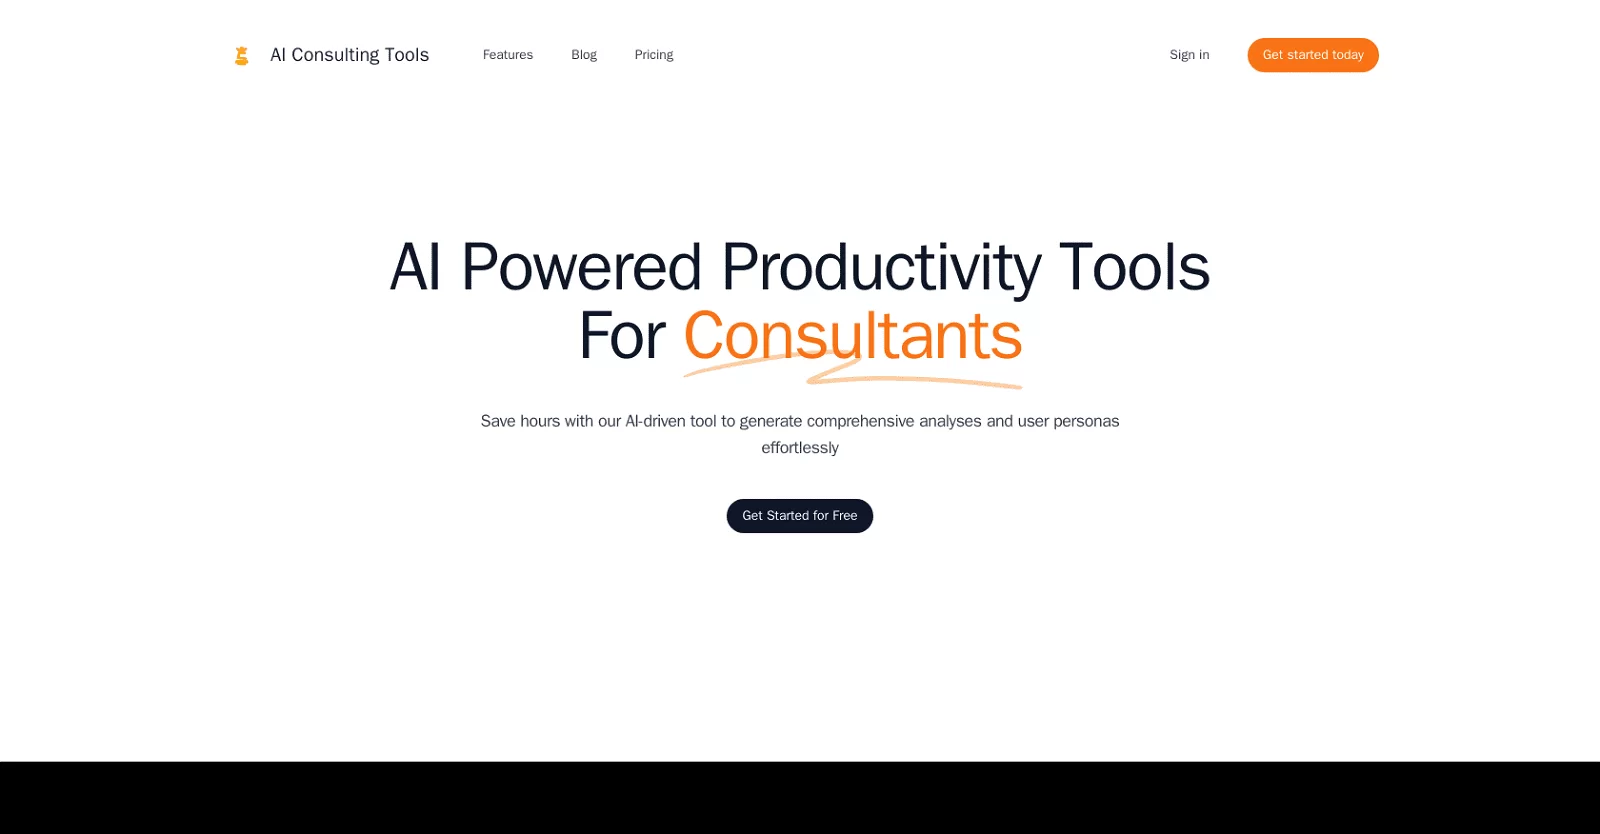 AI consulting tools